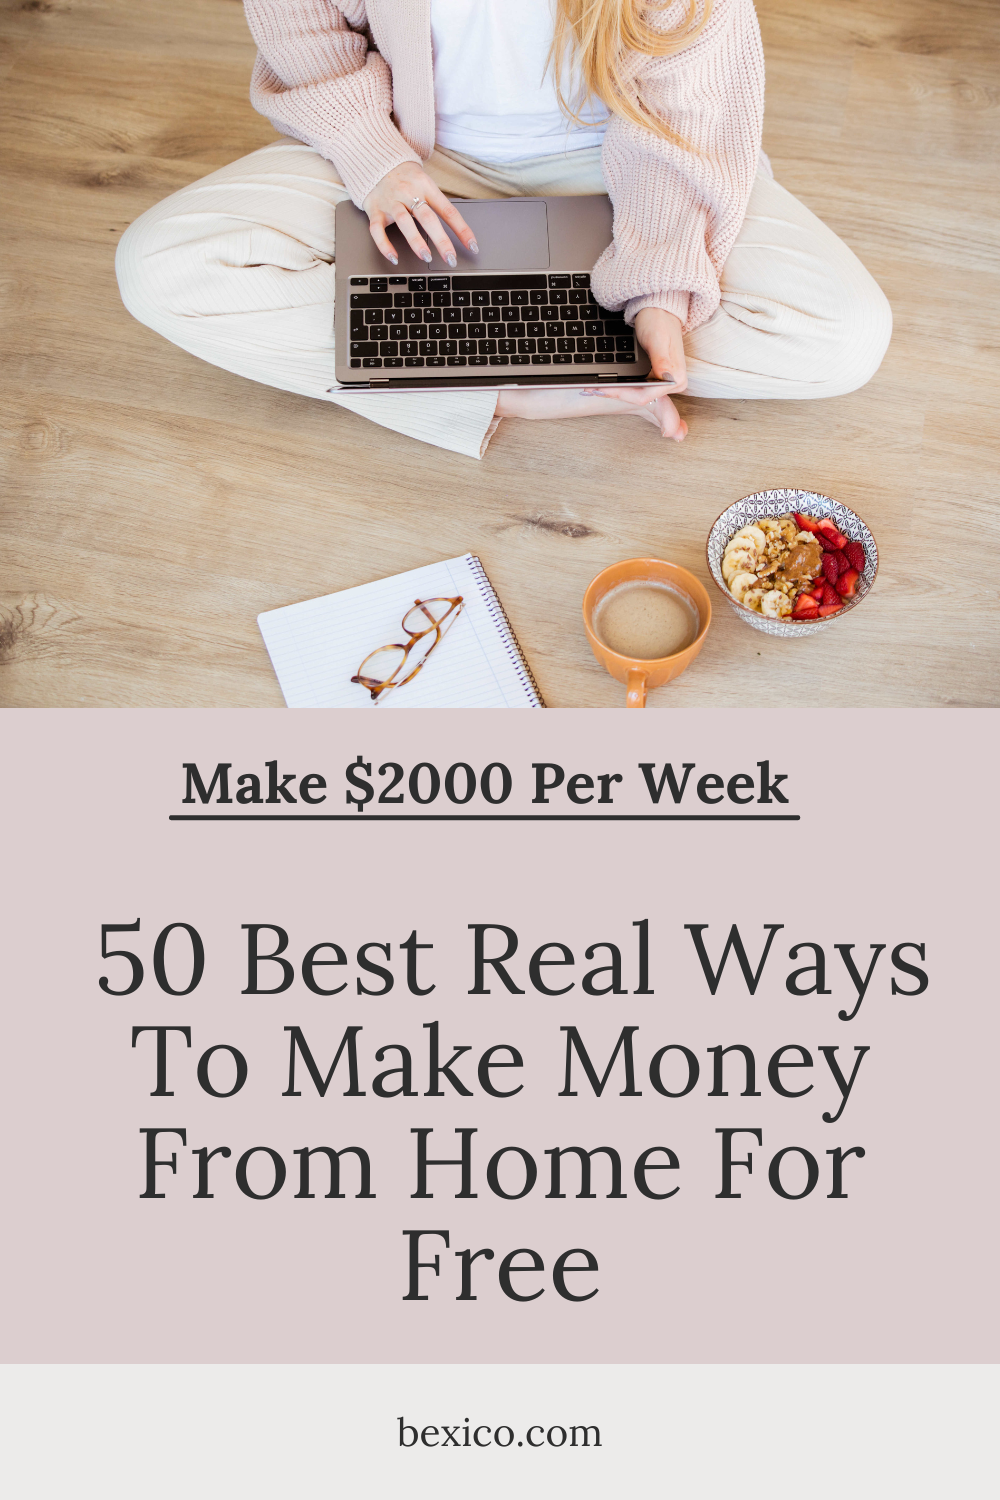 Real Ways to Make Money from Home for Free